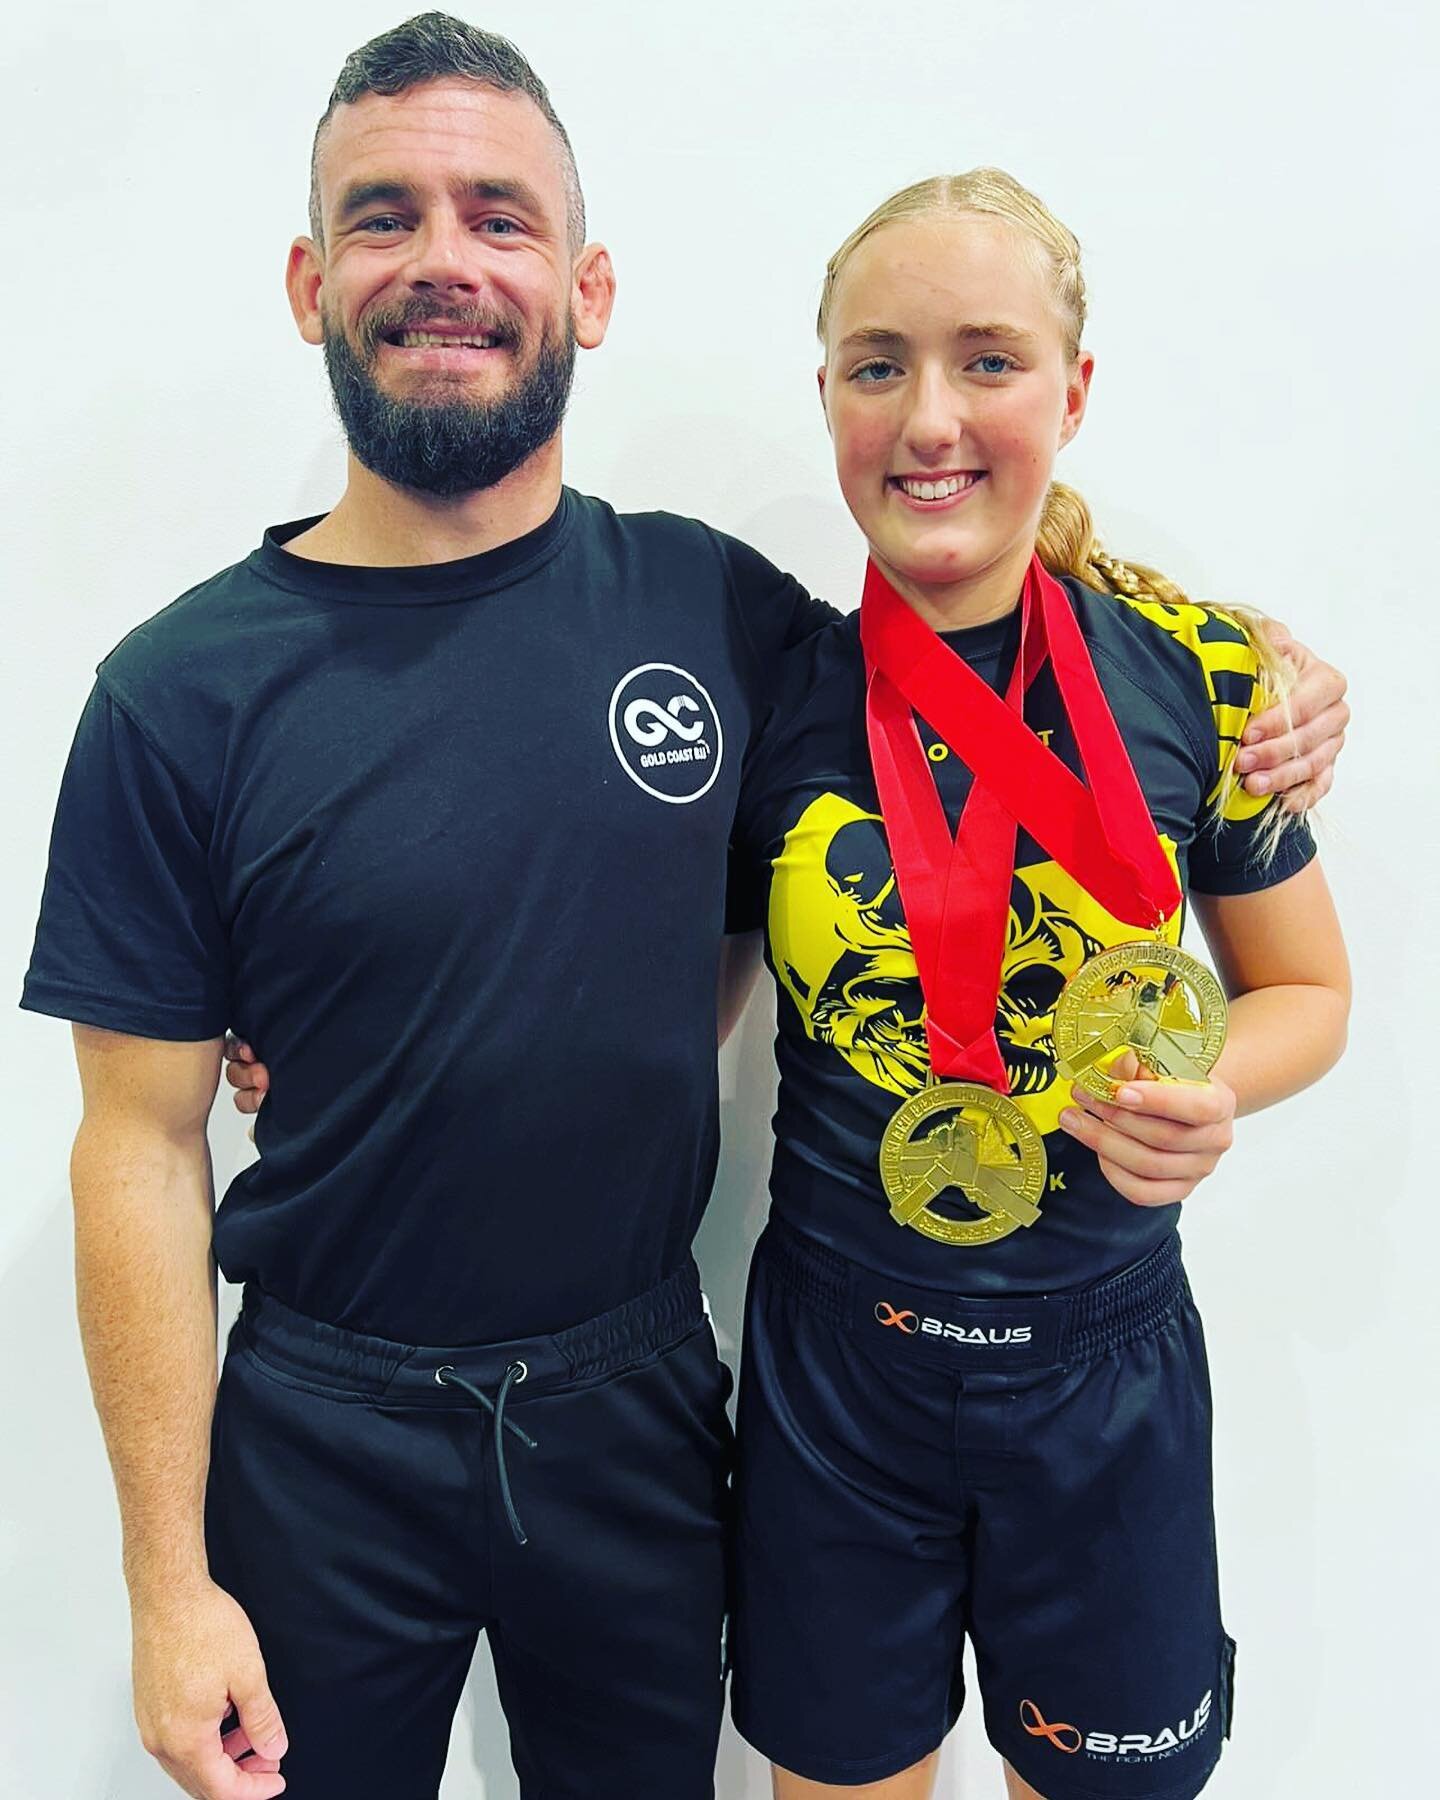 @lava_lovelopez wins double gold at the Moreton Bay Open QBJJC -

An impressive performance from Lava last weekend against a talented opponent going up in weight and age.

Lava employed a powerful top game using her precise outside passing combined w